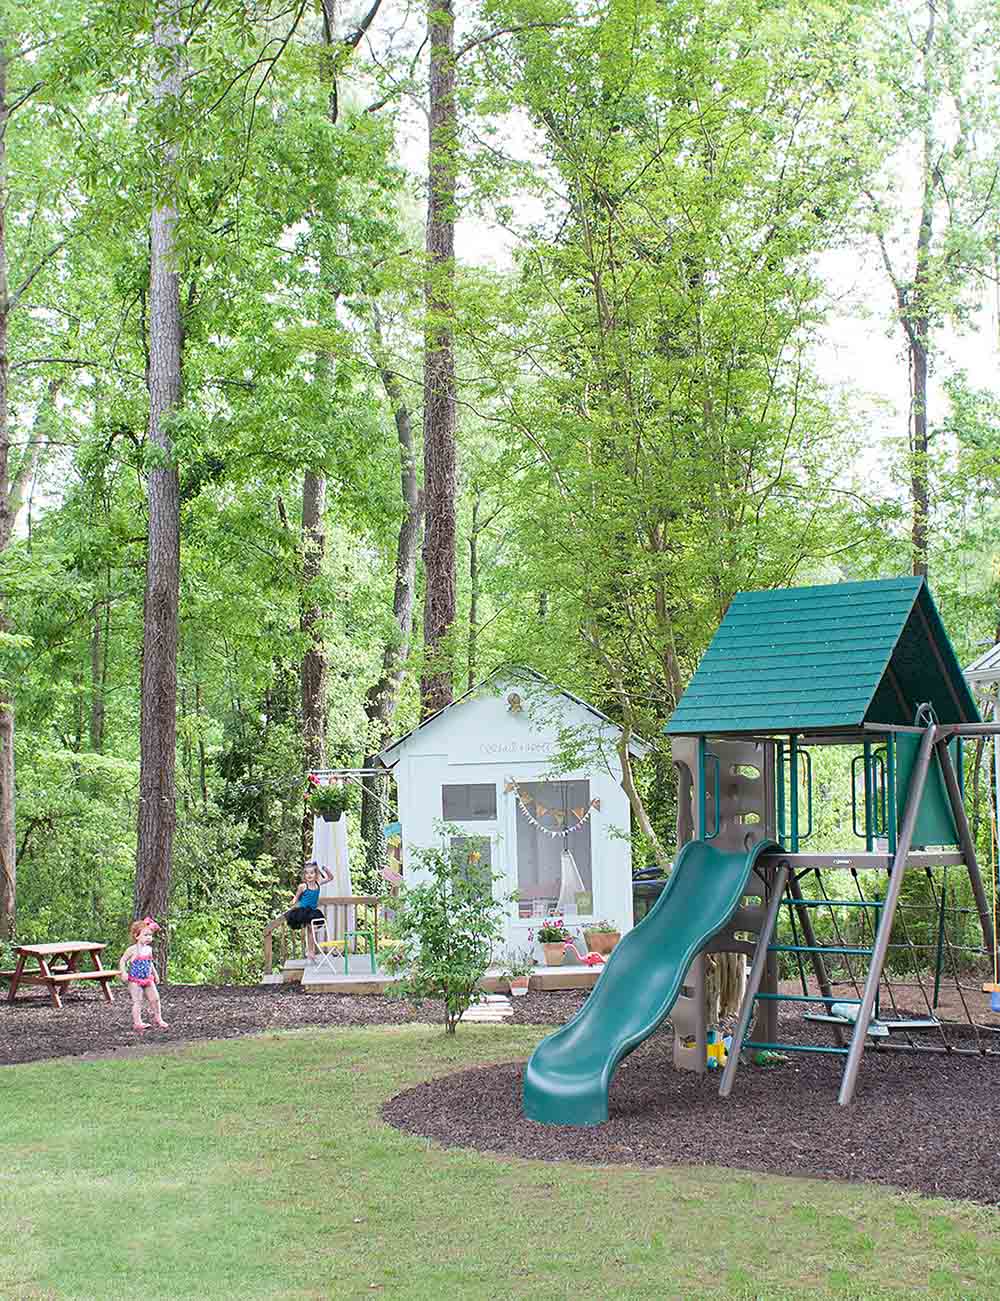 Two young girls play in a backyard next to a swing set and playhouse.